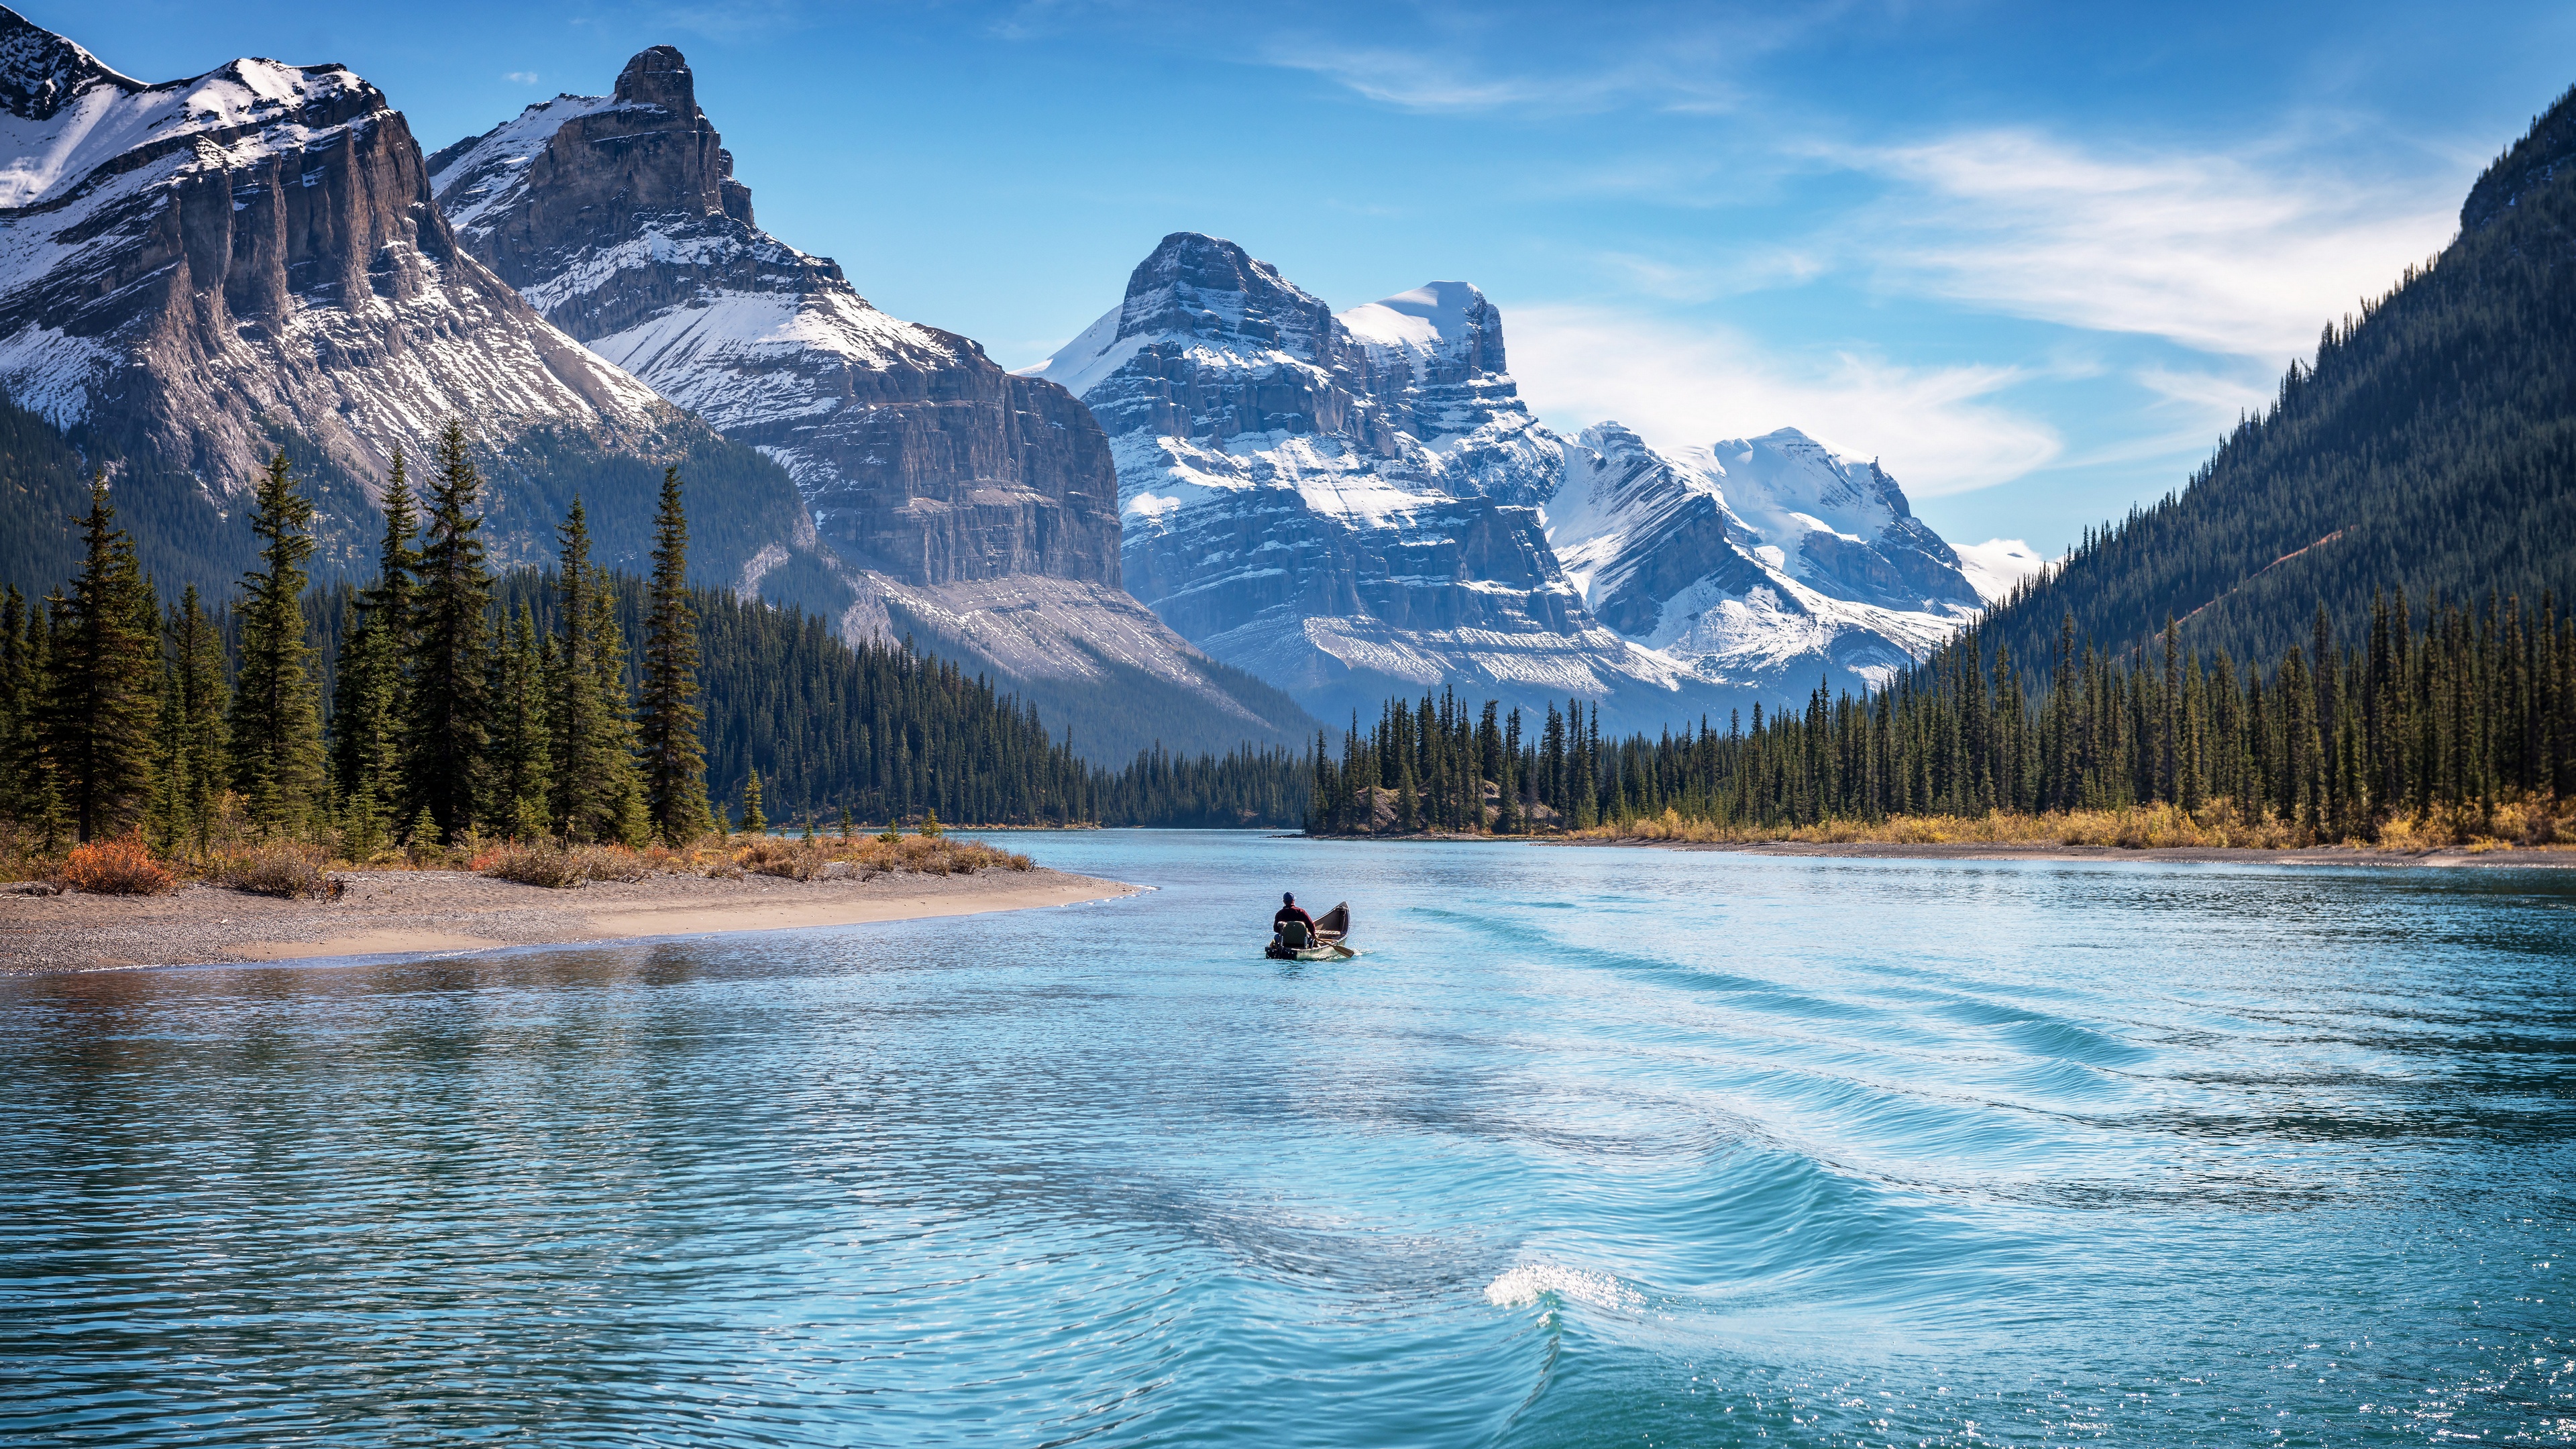 General 3840x2160 nature landscape Jasper National Park Canada Maligne Lake mountains forest sky waves boat men lake water snow trees